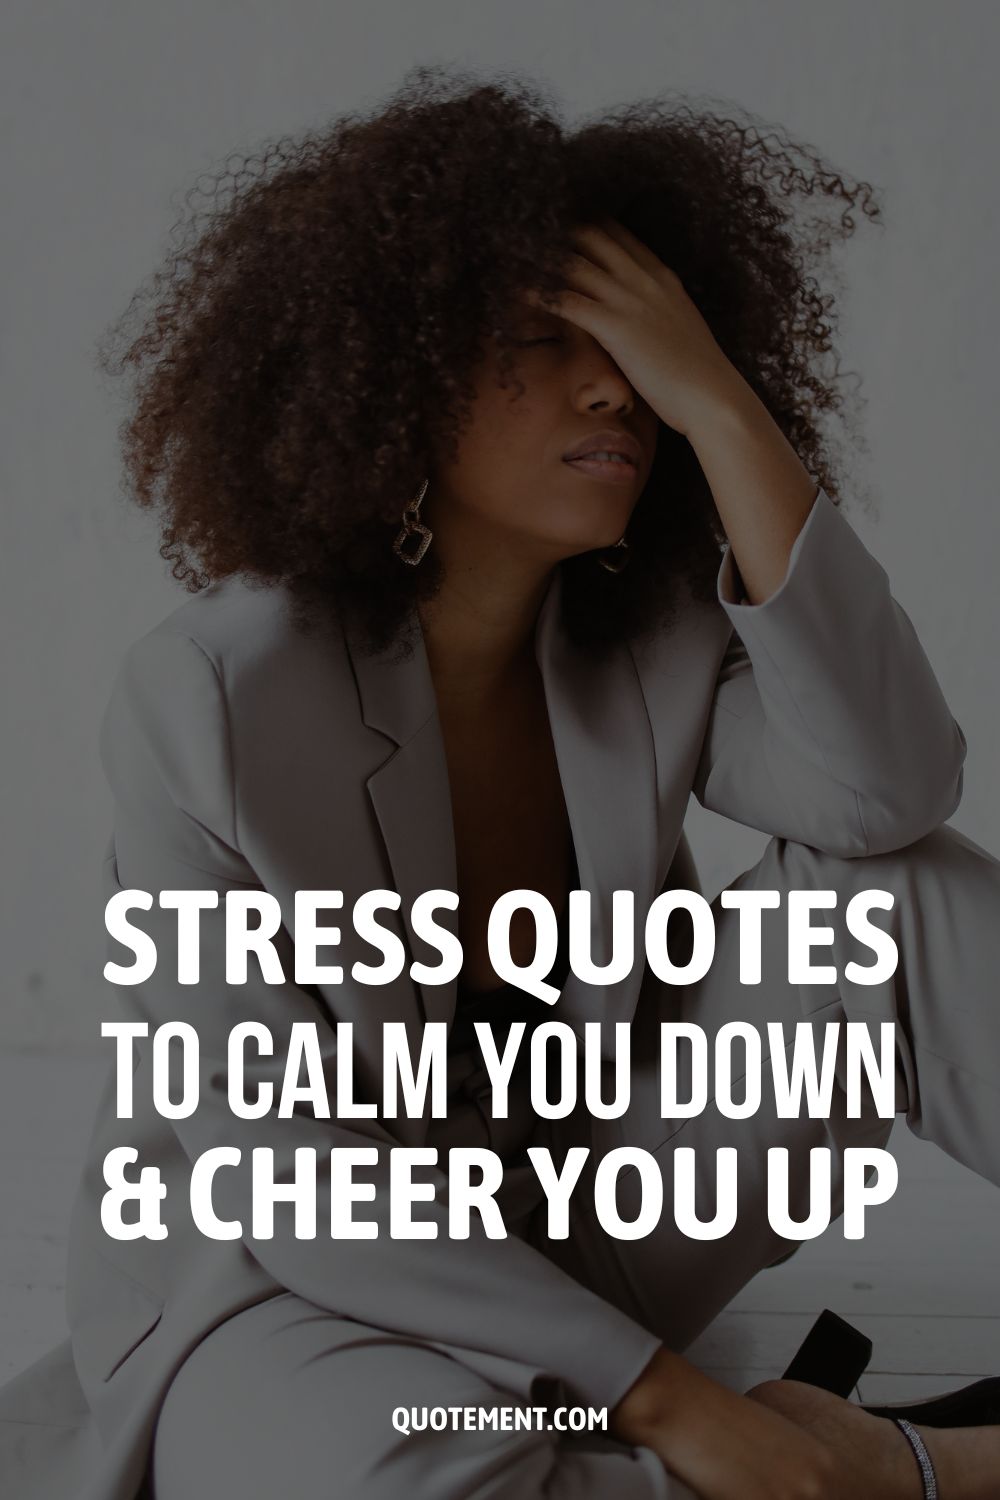 100 Stress Quotes To Calm You Down & Cheer You Up